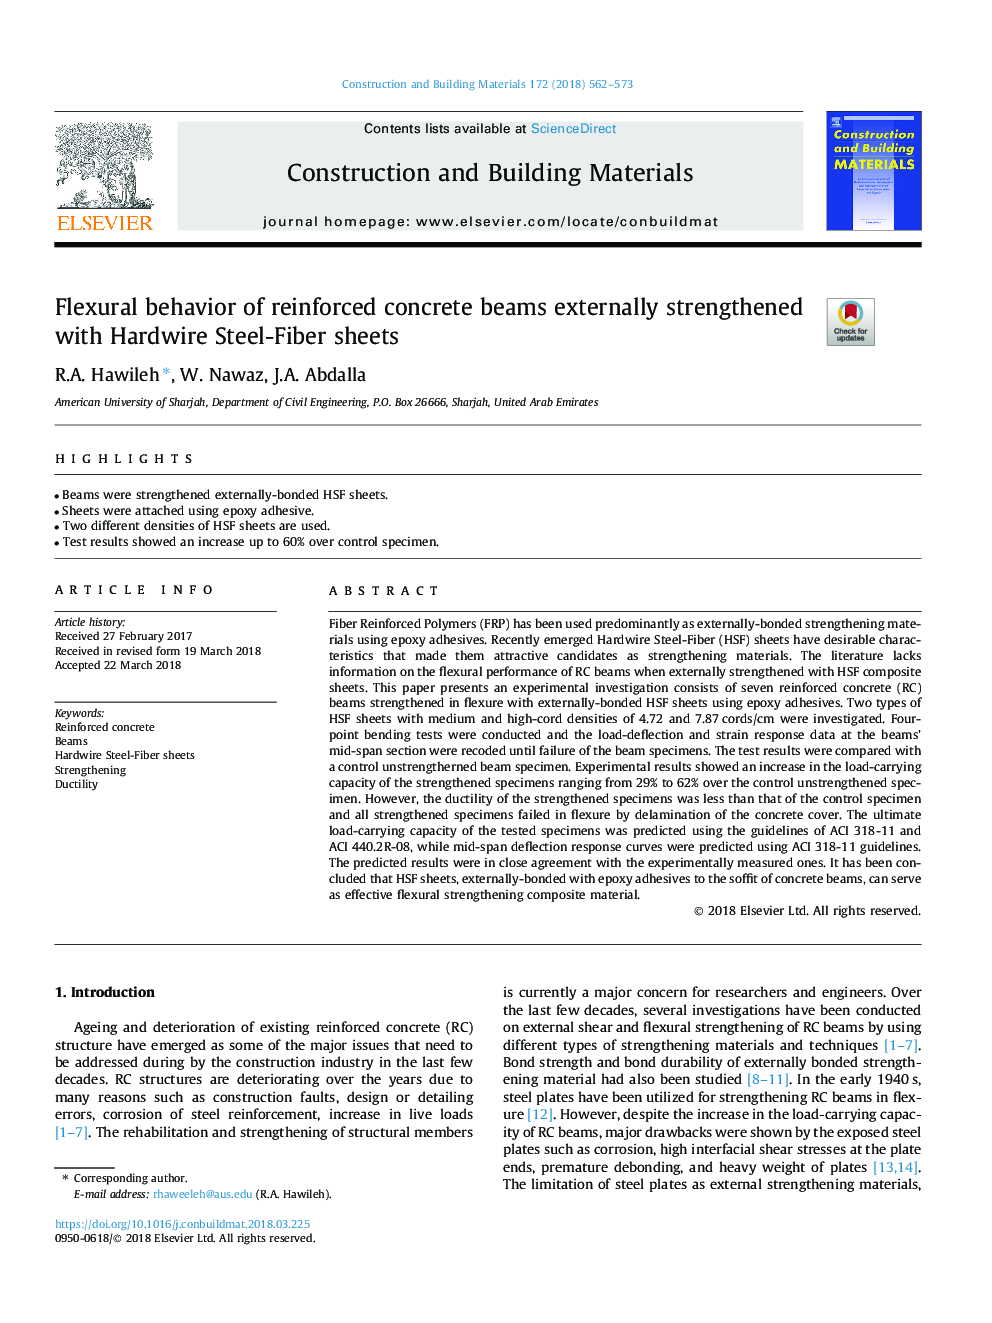 Flexural behavior of reinforced concrete beams externally strengthened with Hardwire Steel-Fiber sheets